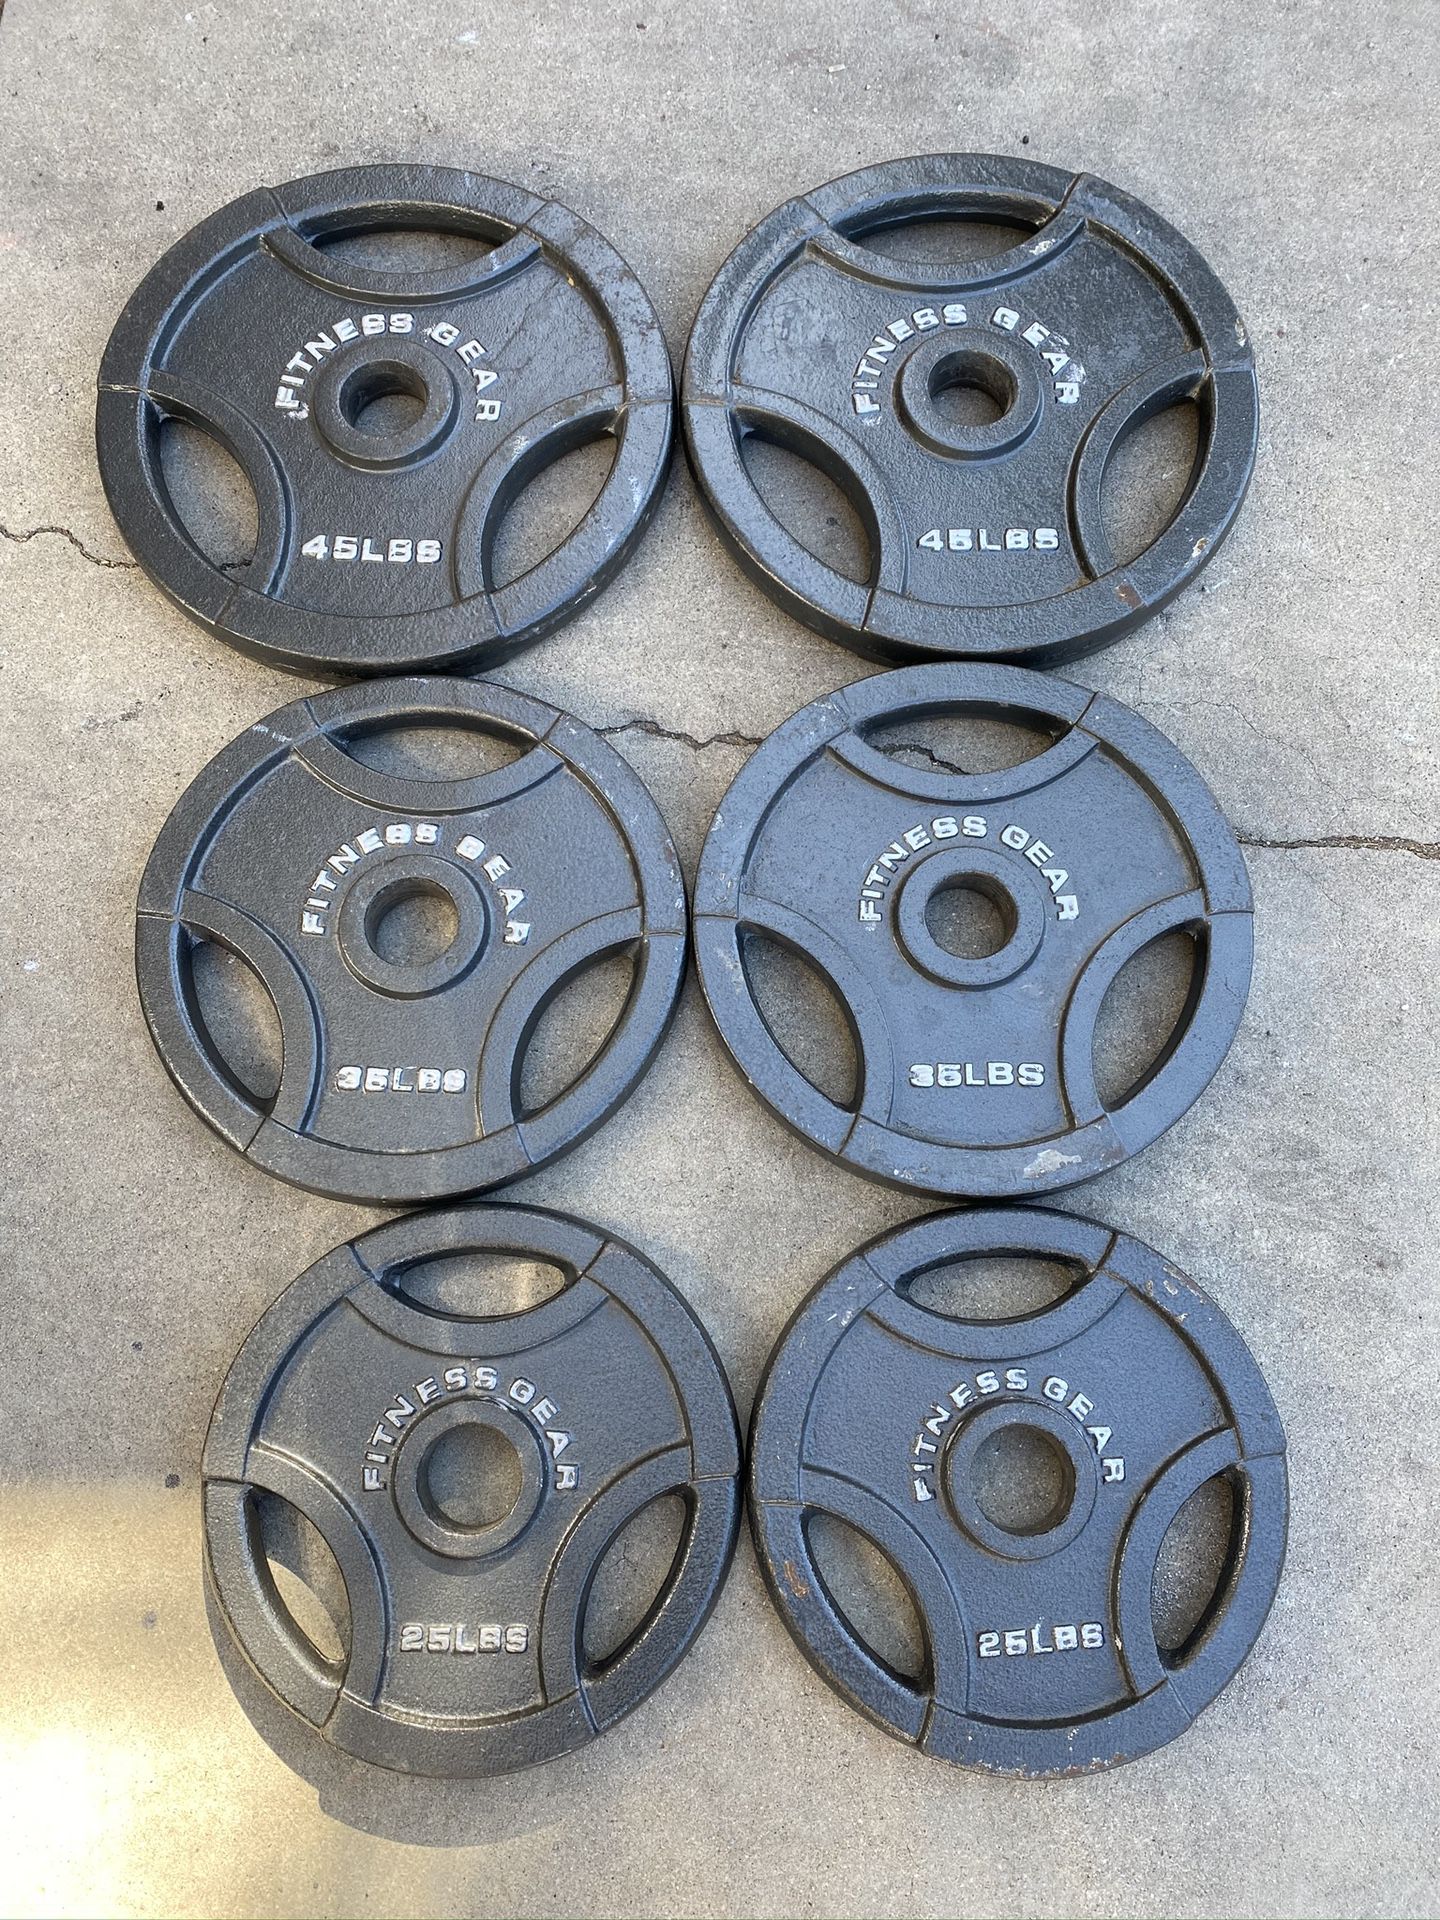 Olympic Weight Plates